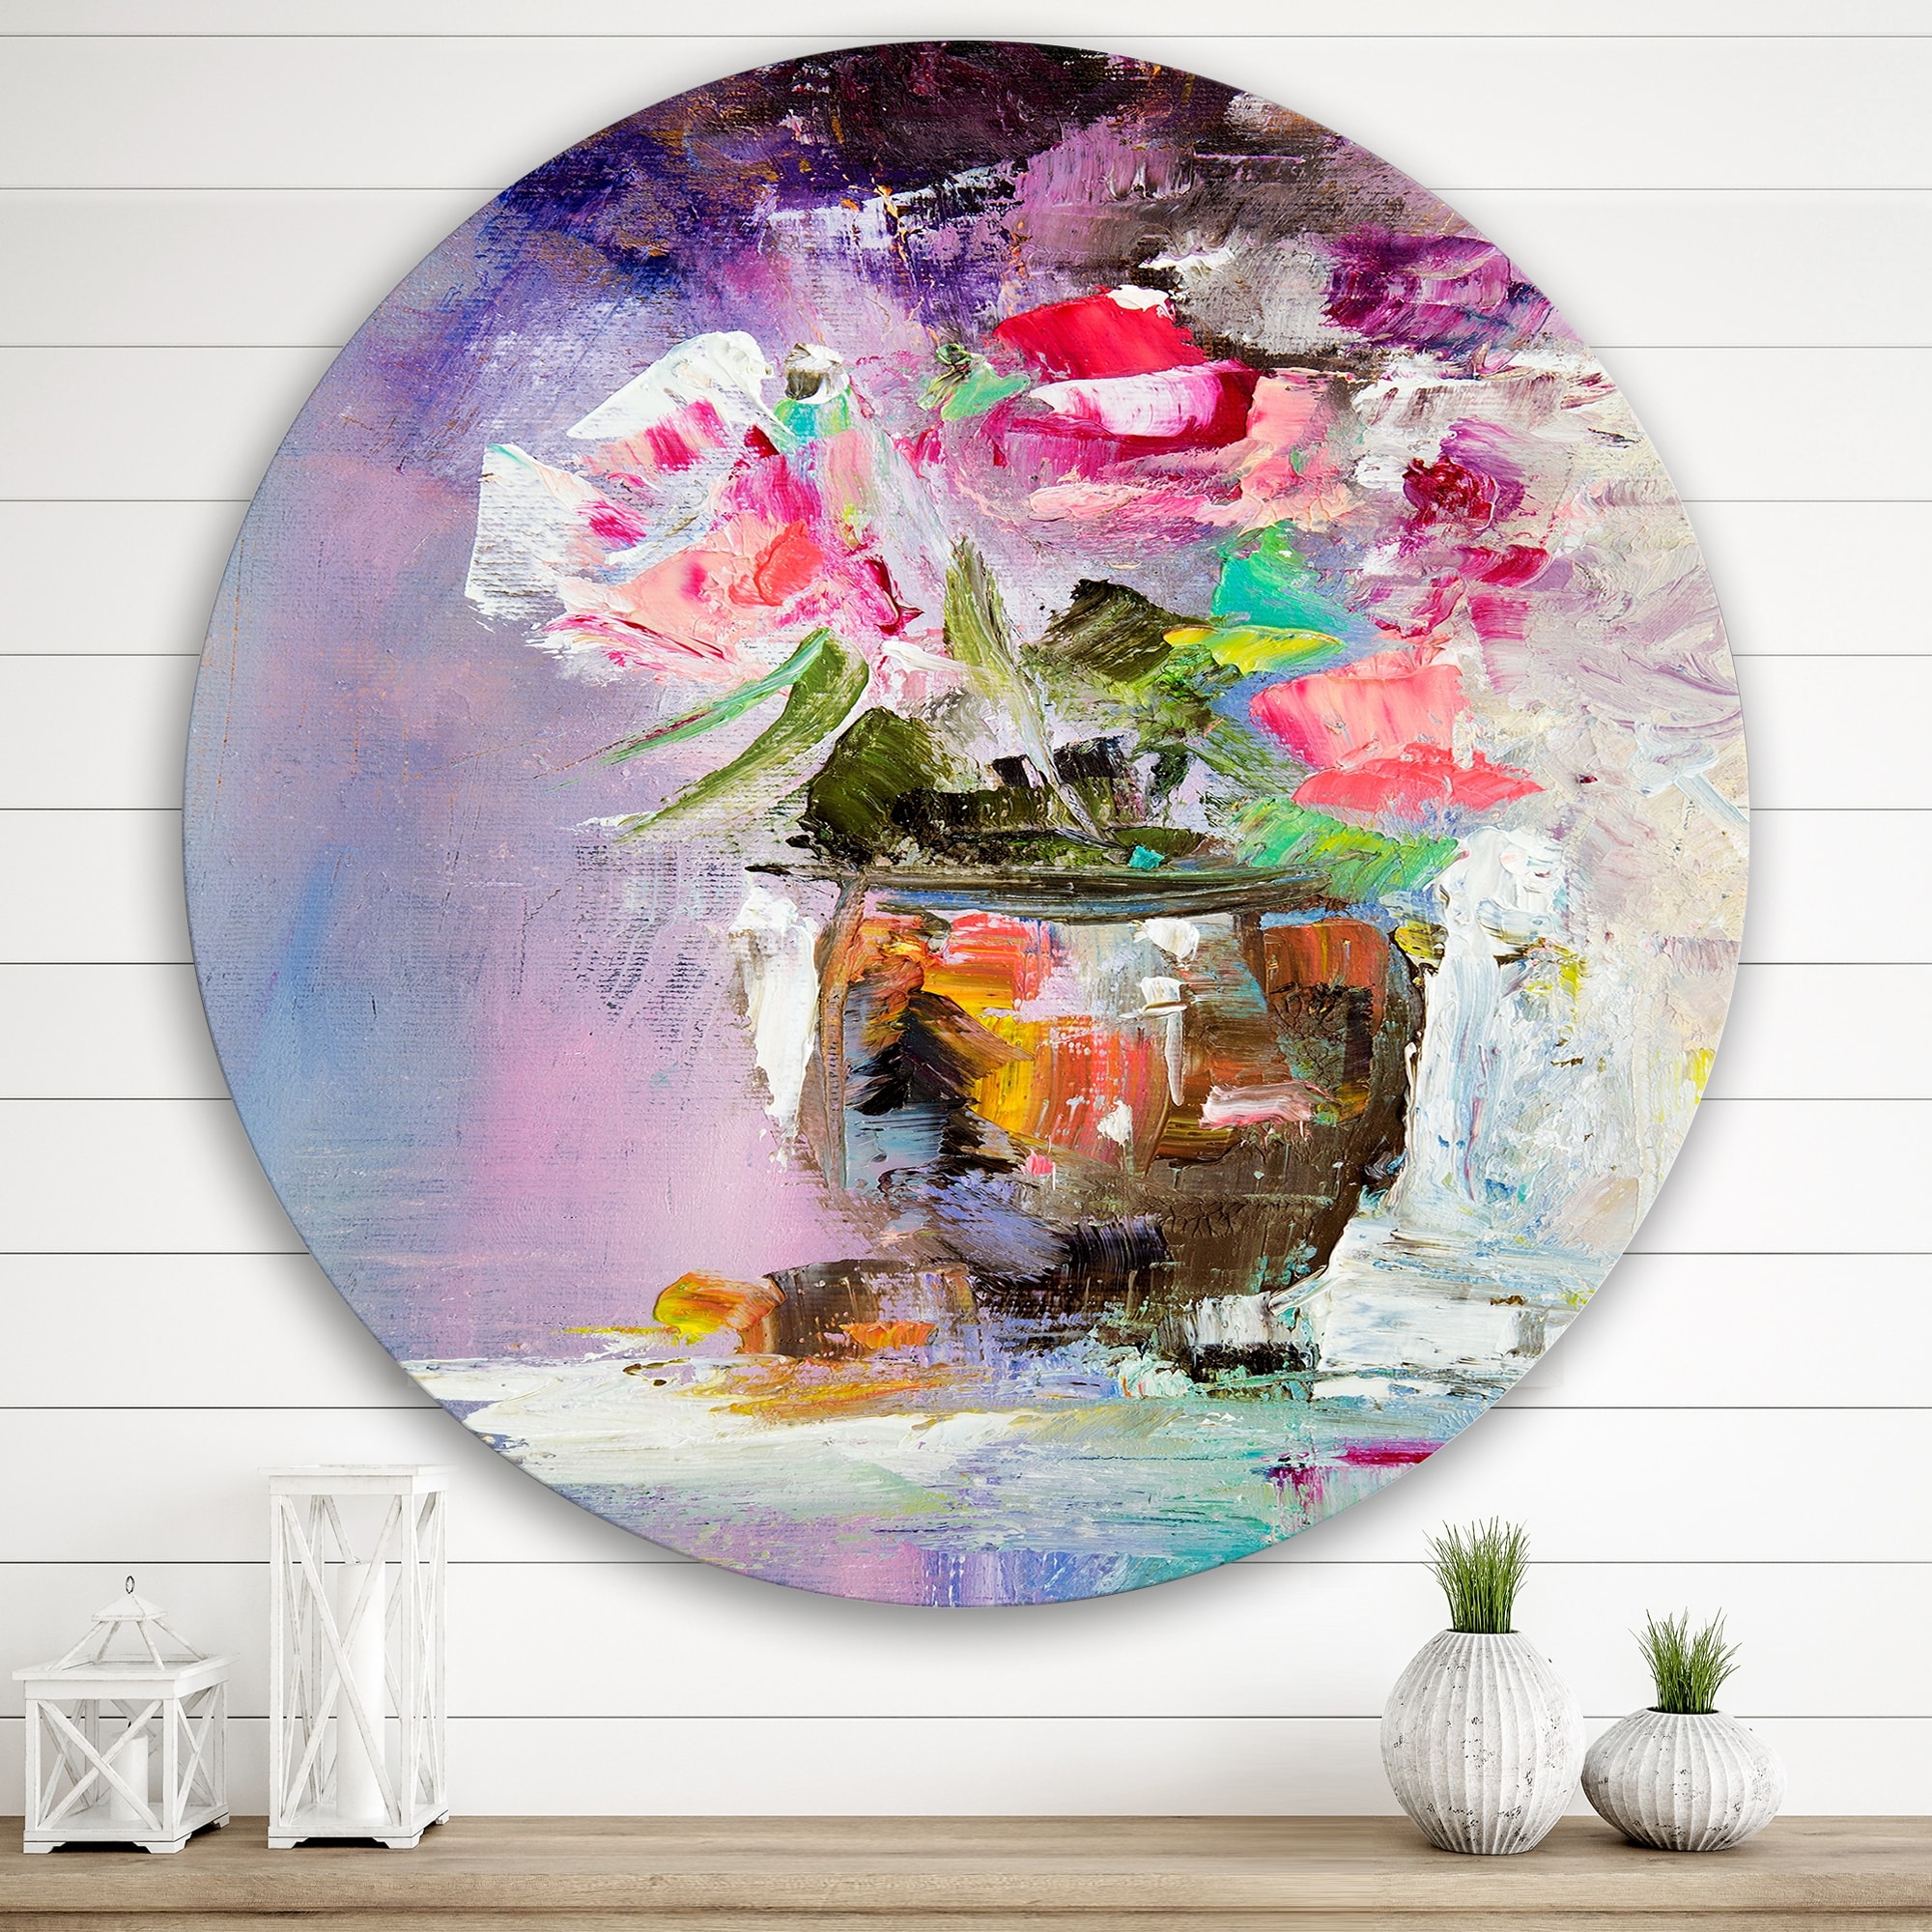 https://ak1.ostkcdn.com/images/products/is/images/direct/ae2c4e663cef47a7f298a4fb29abc5f900714fd8/Designart-%27Pink-Fresh-Abstract-Flowers-Bouquet%27-Modern-Metal-Circle-Wall-Art.jpg